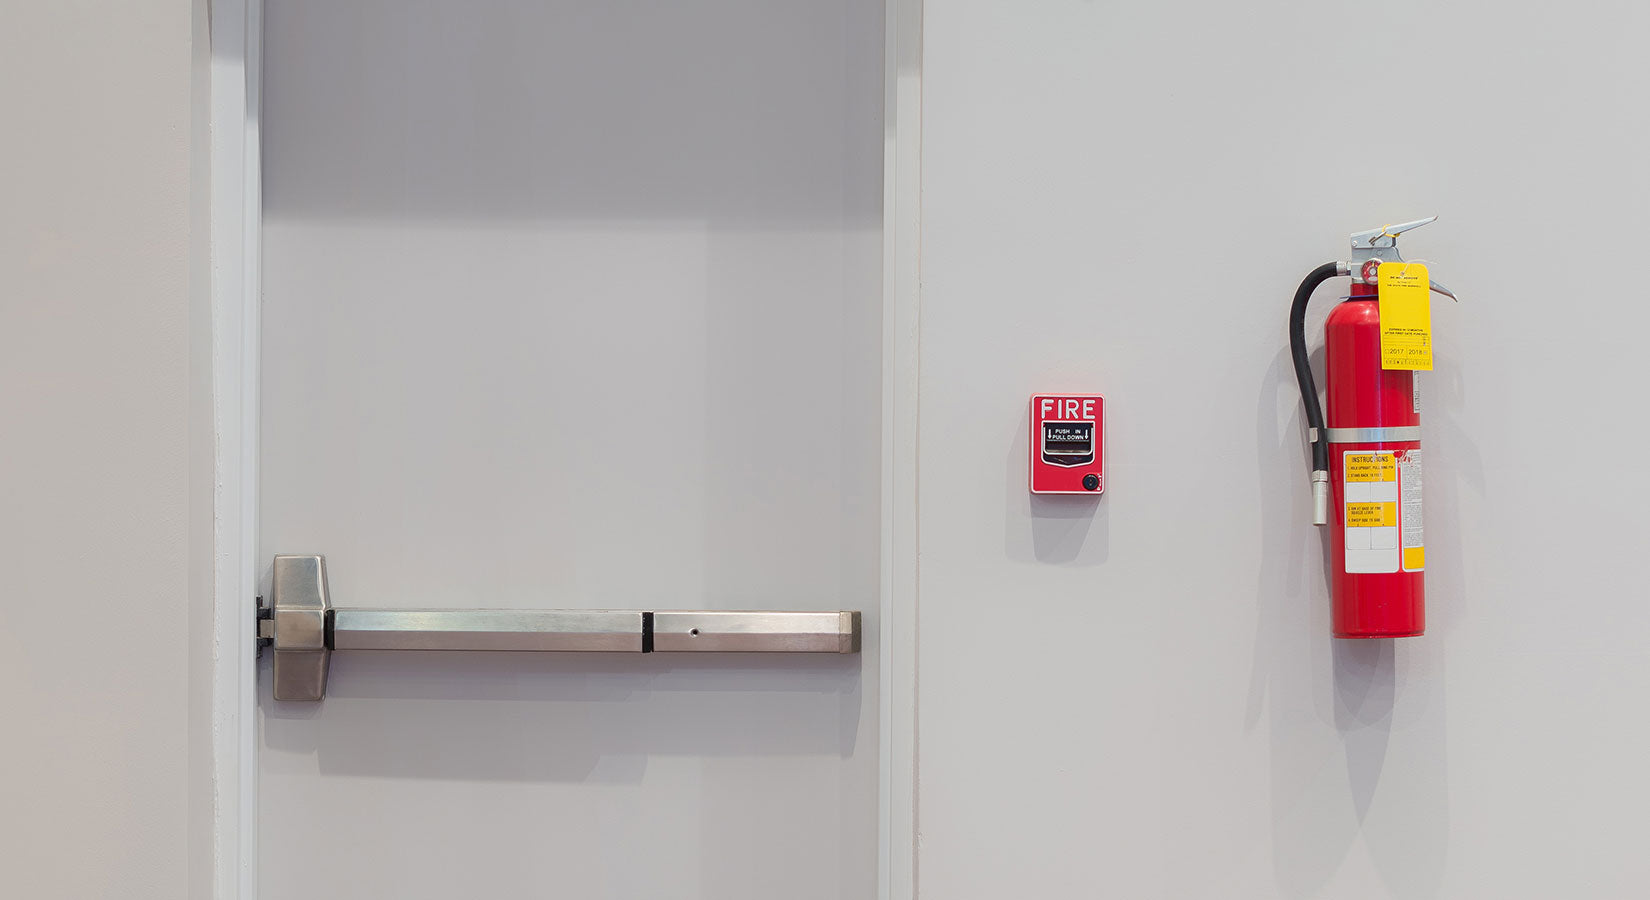 Von Duprin Exit Devices - Never Compromise When Security Is at Stake